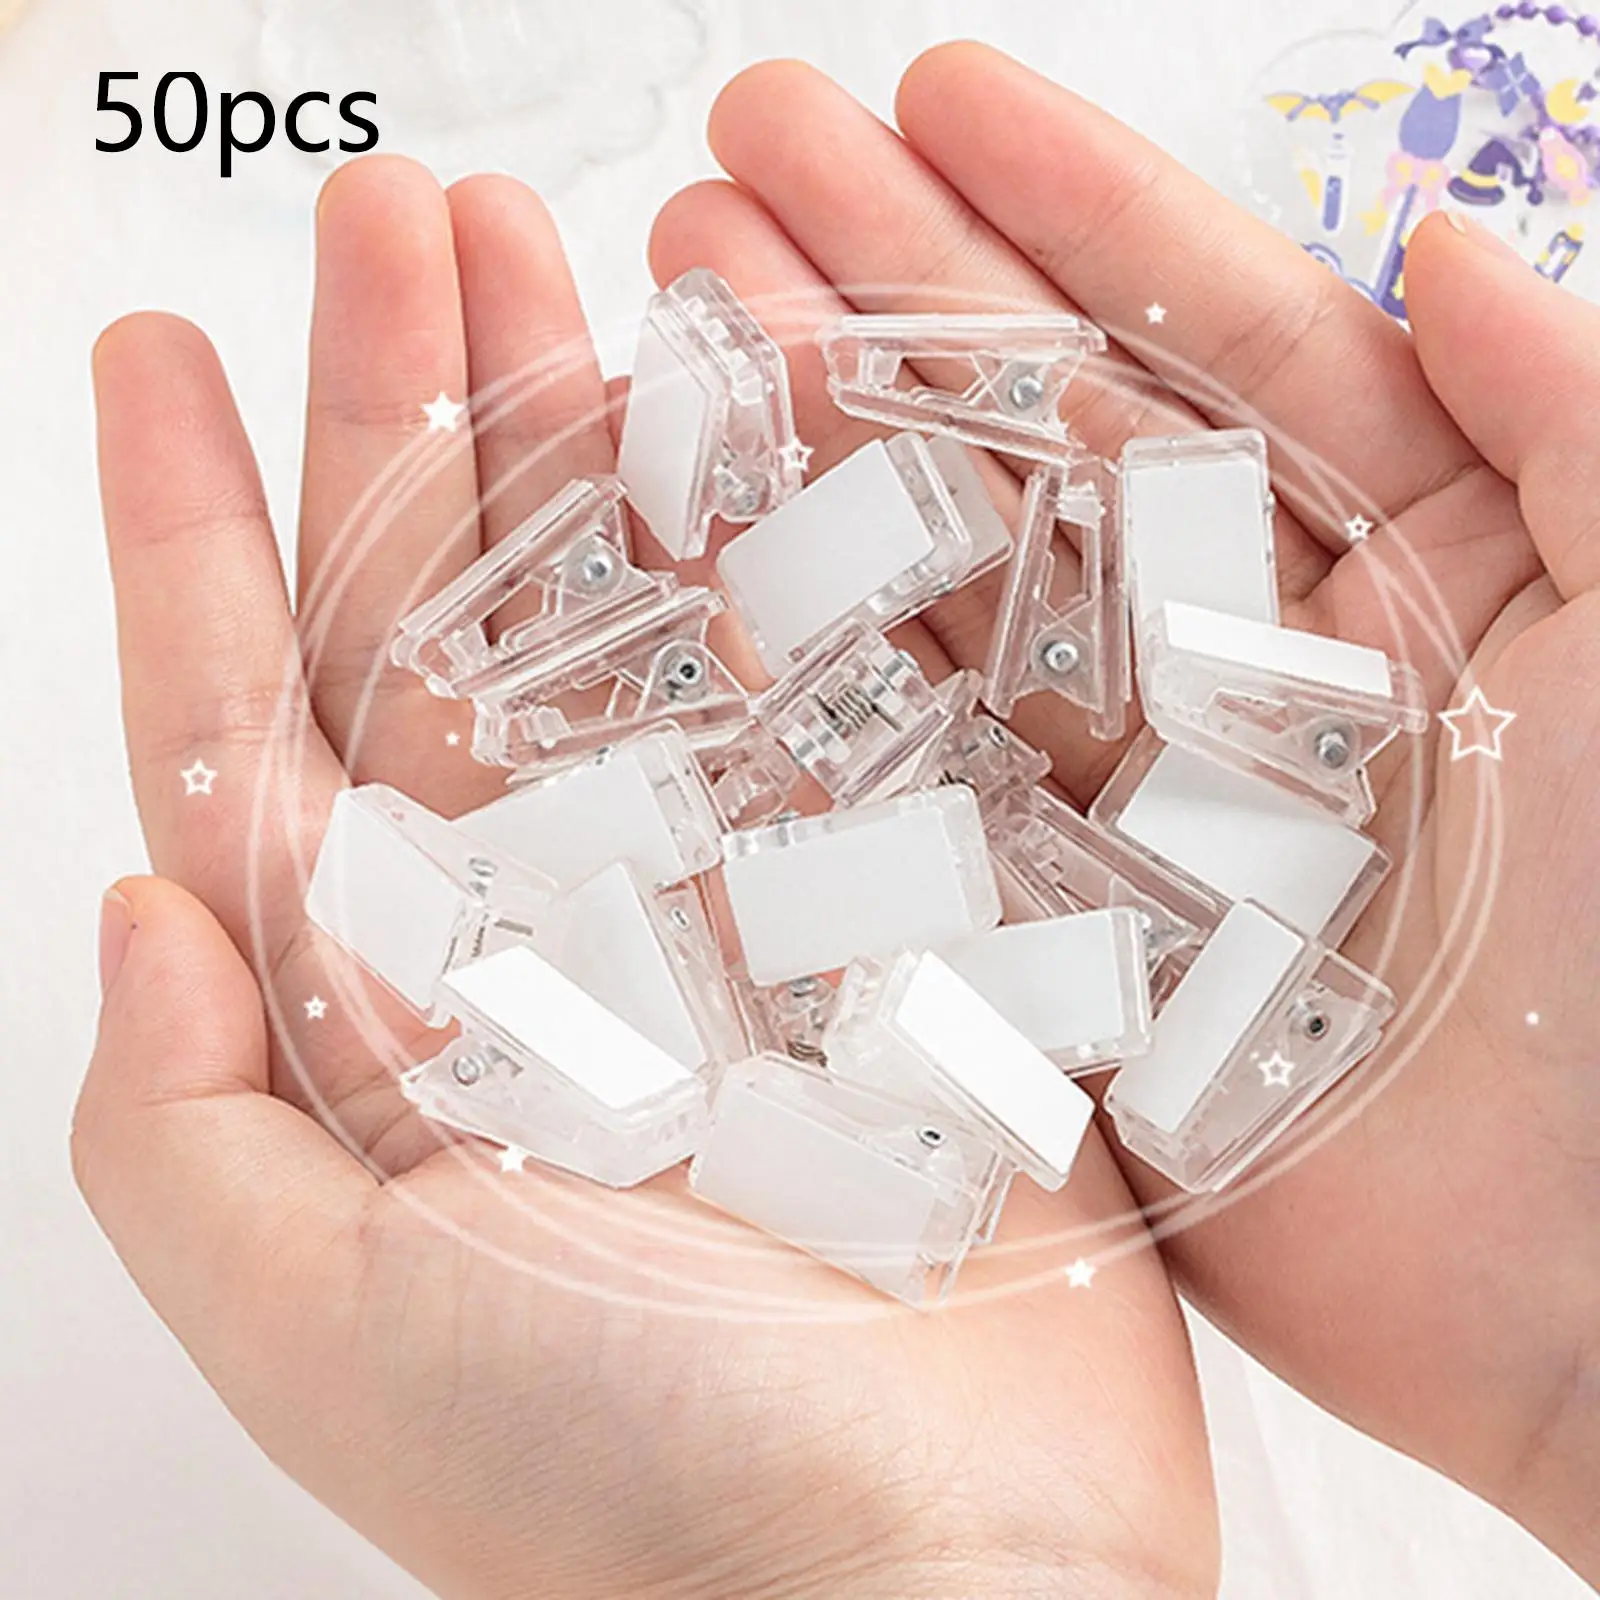 50 Pieces Double Sided Adhesive Spring Clips Sticky Clips Wall Decoration